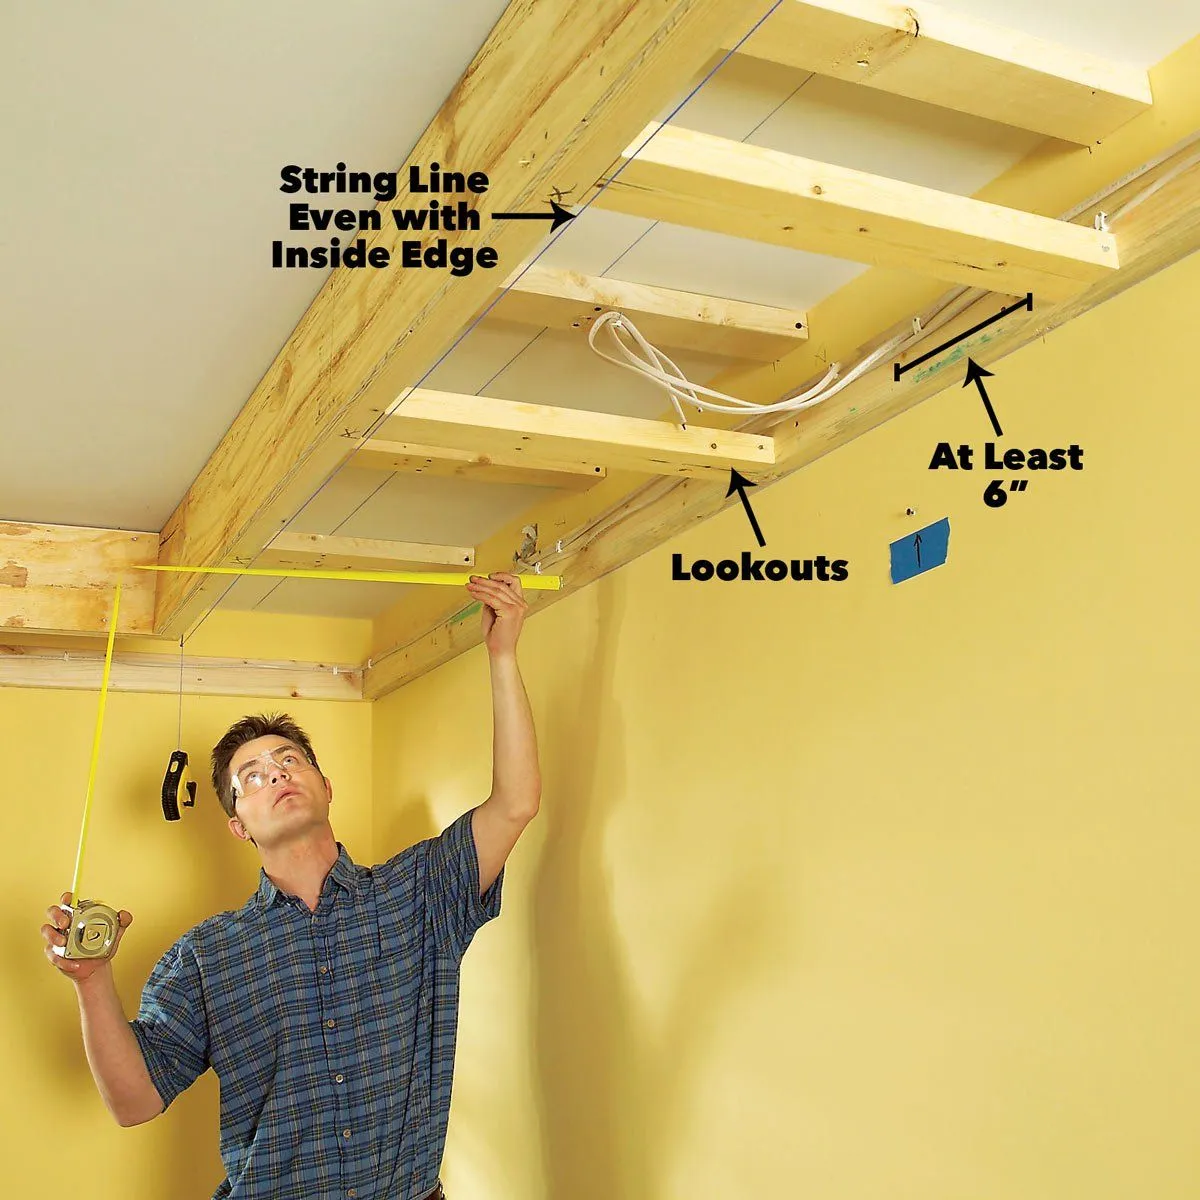 How To Build a Soffit Box with Recessed Lighting For Beginners